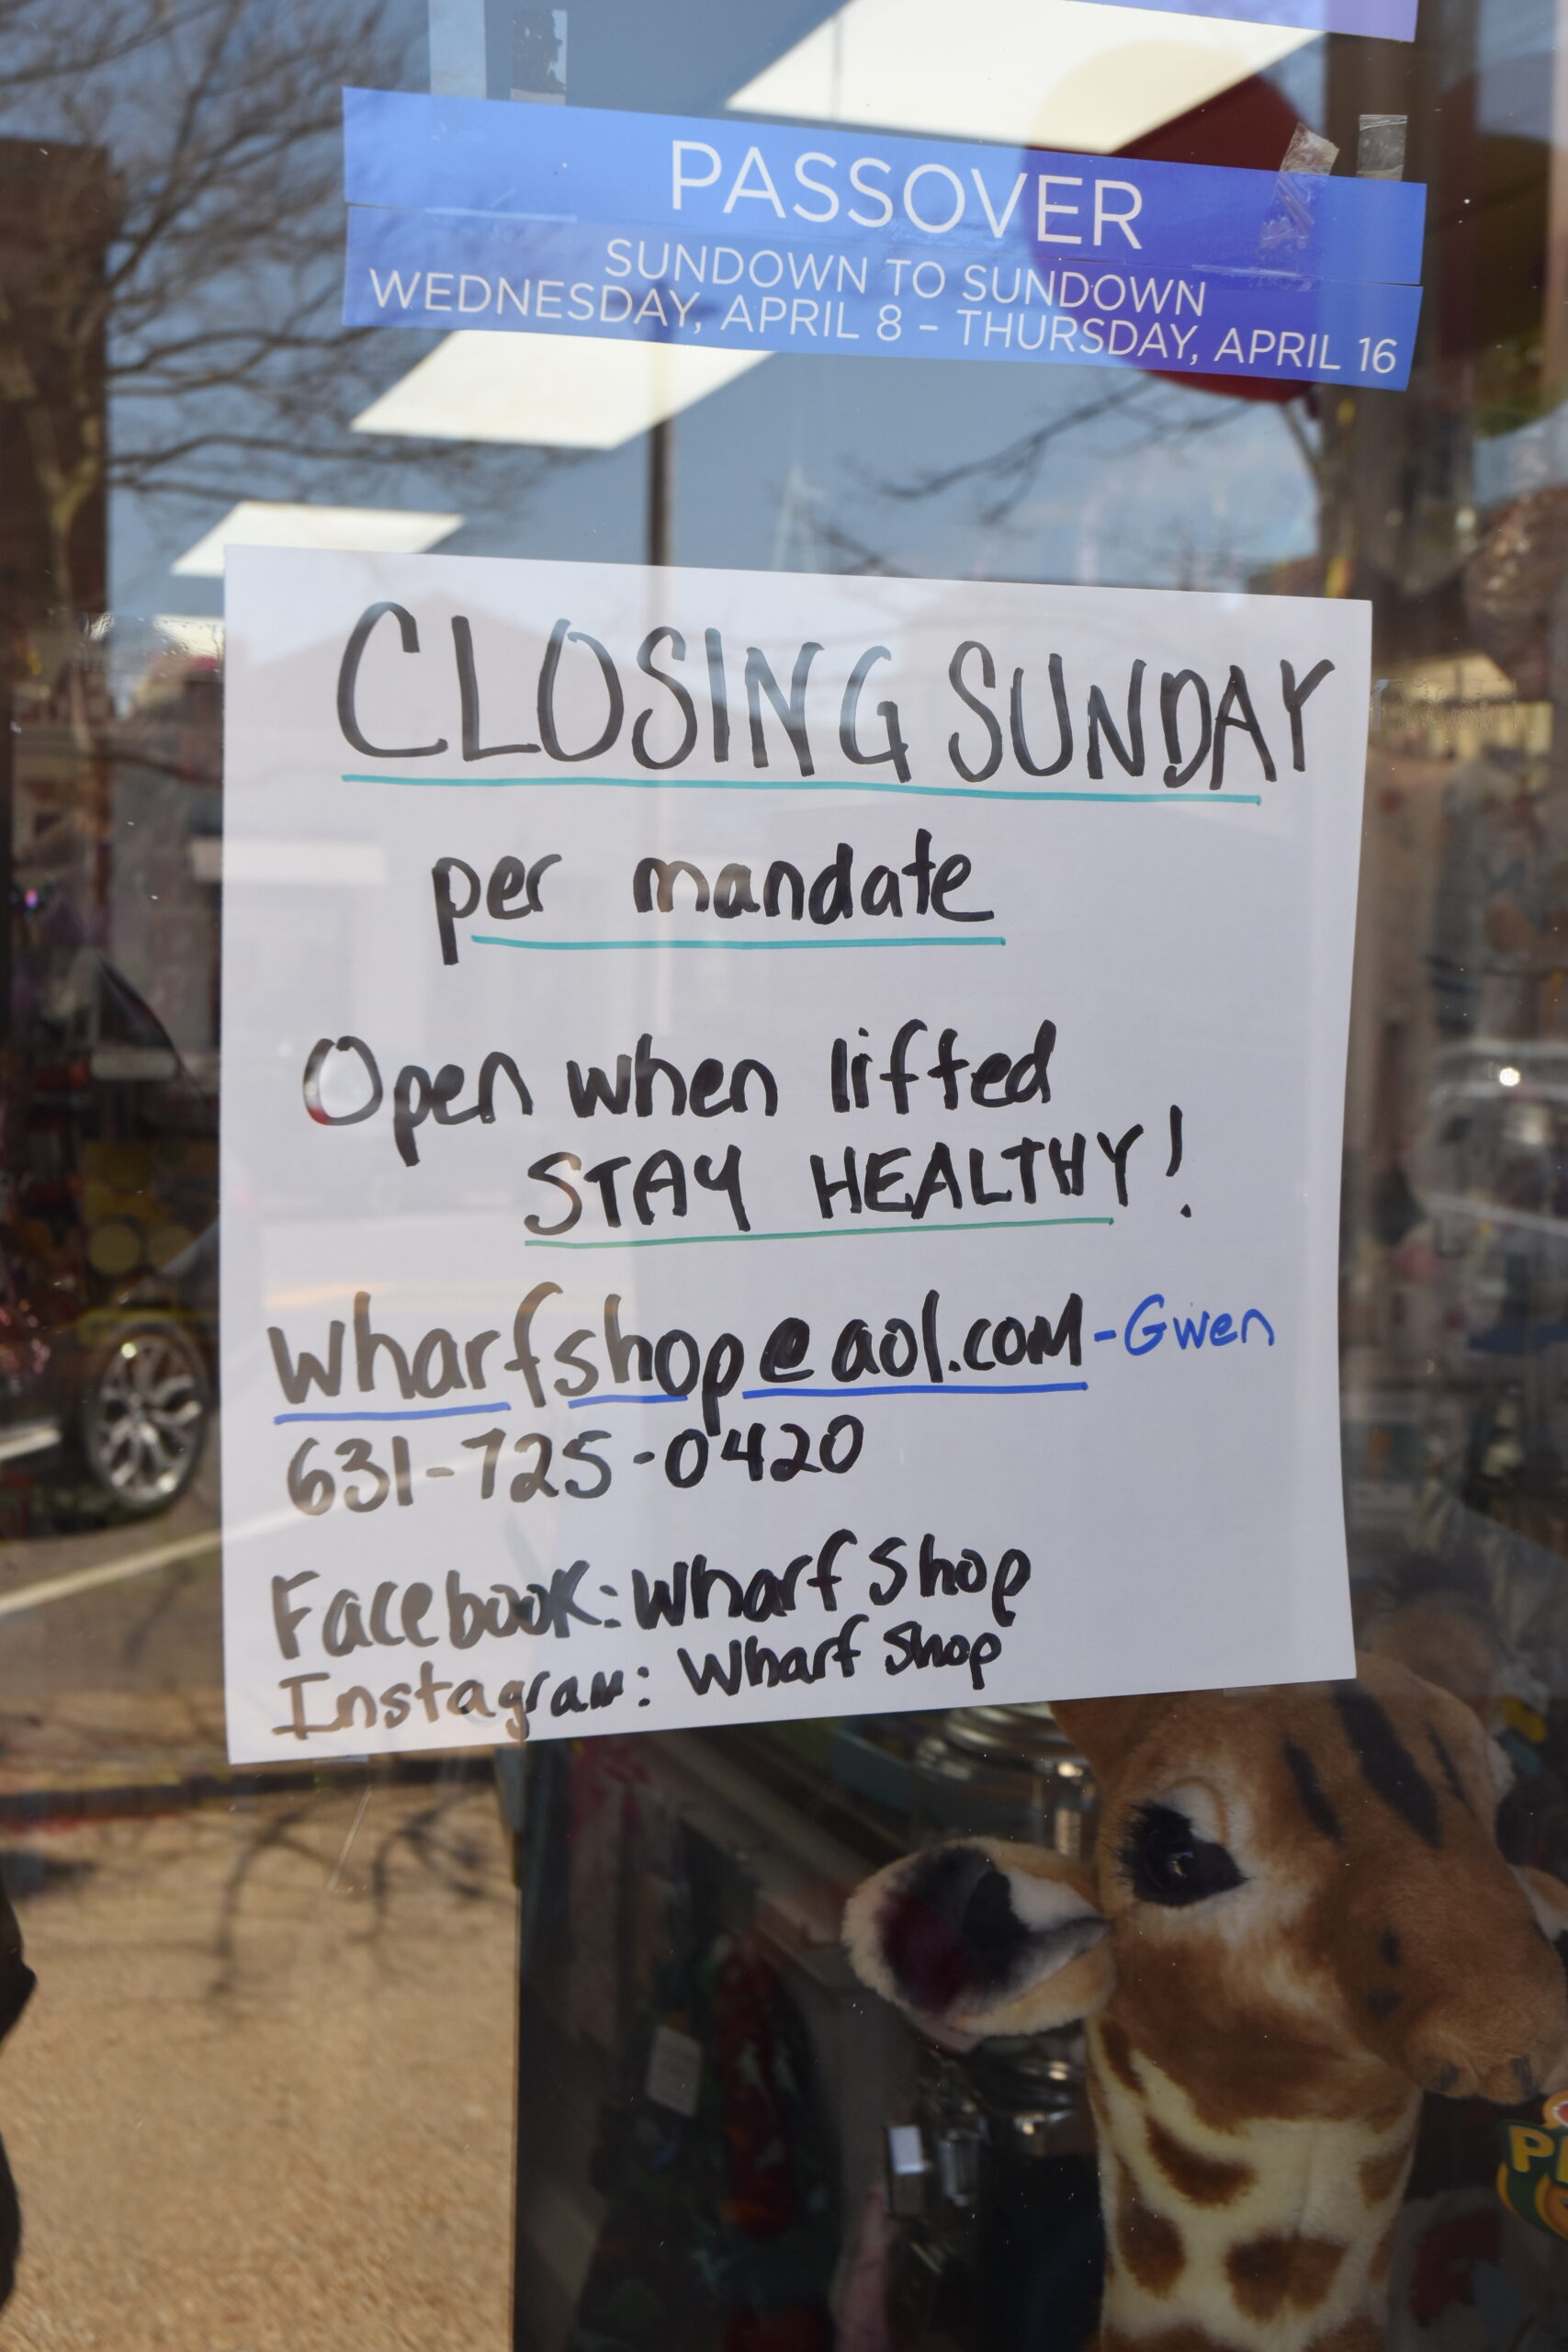 In March of 2020, businesses were forced to shut down due to COVID 19.